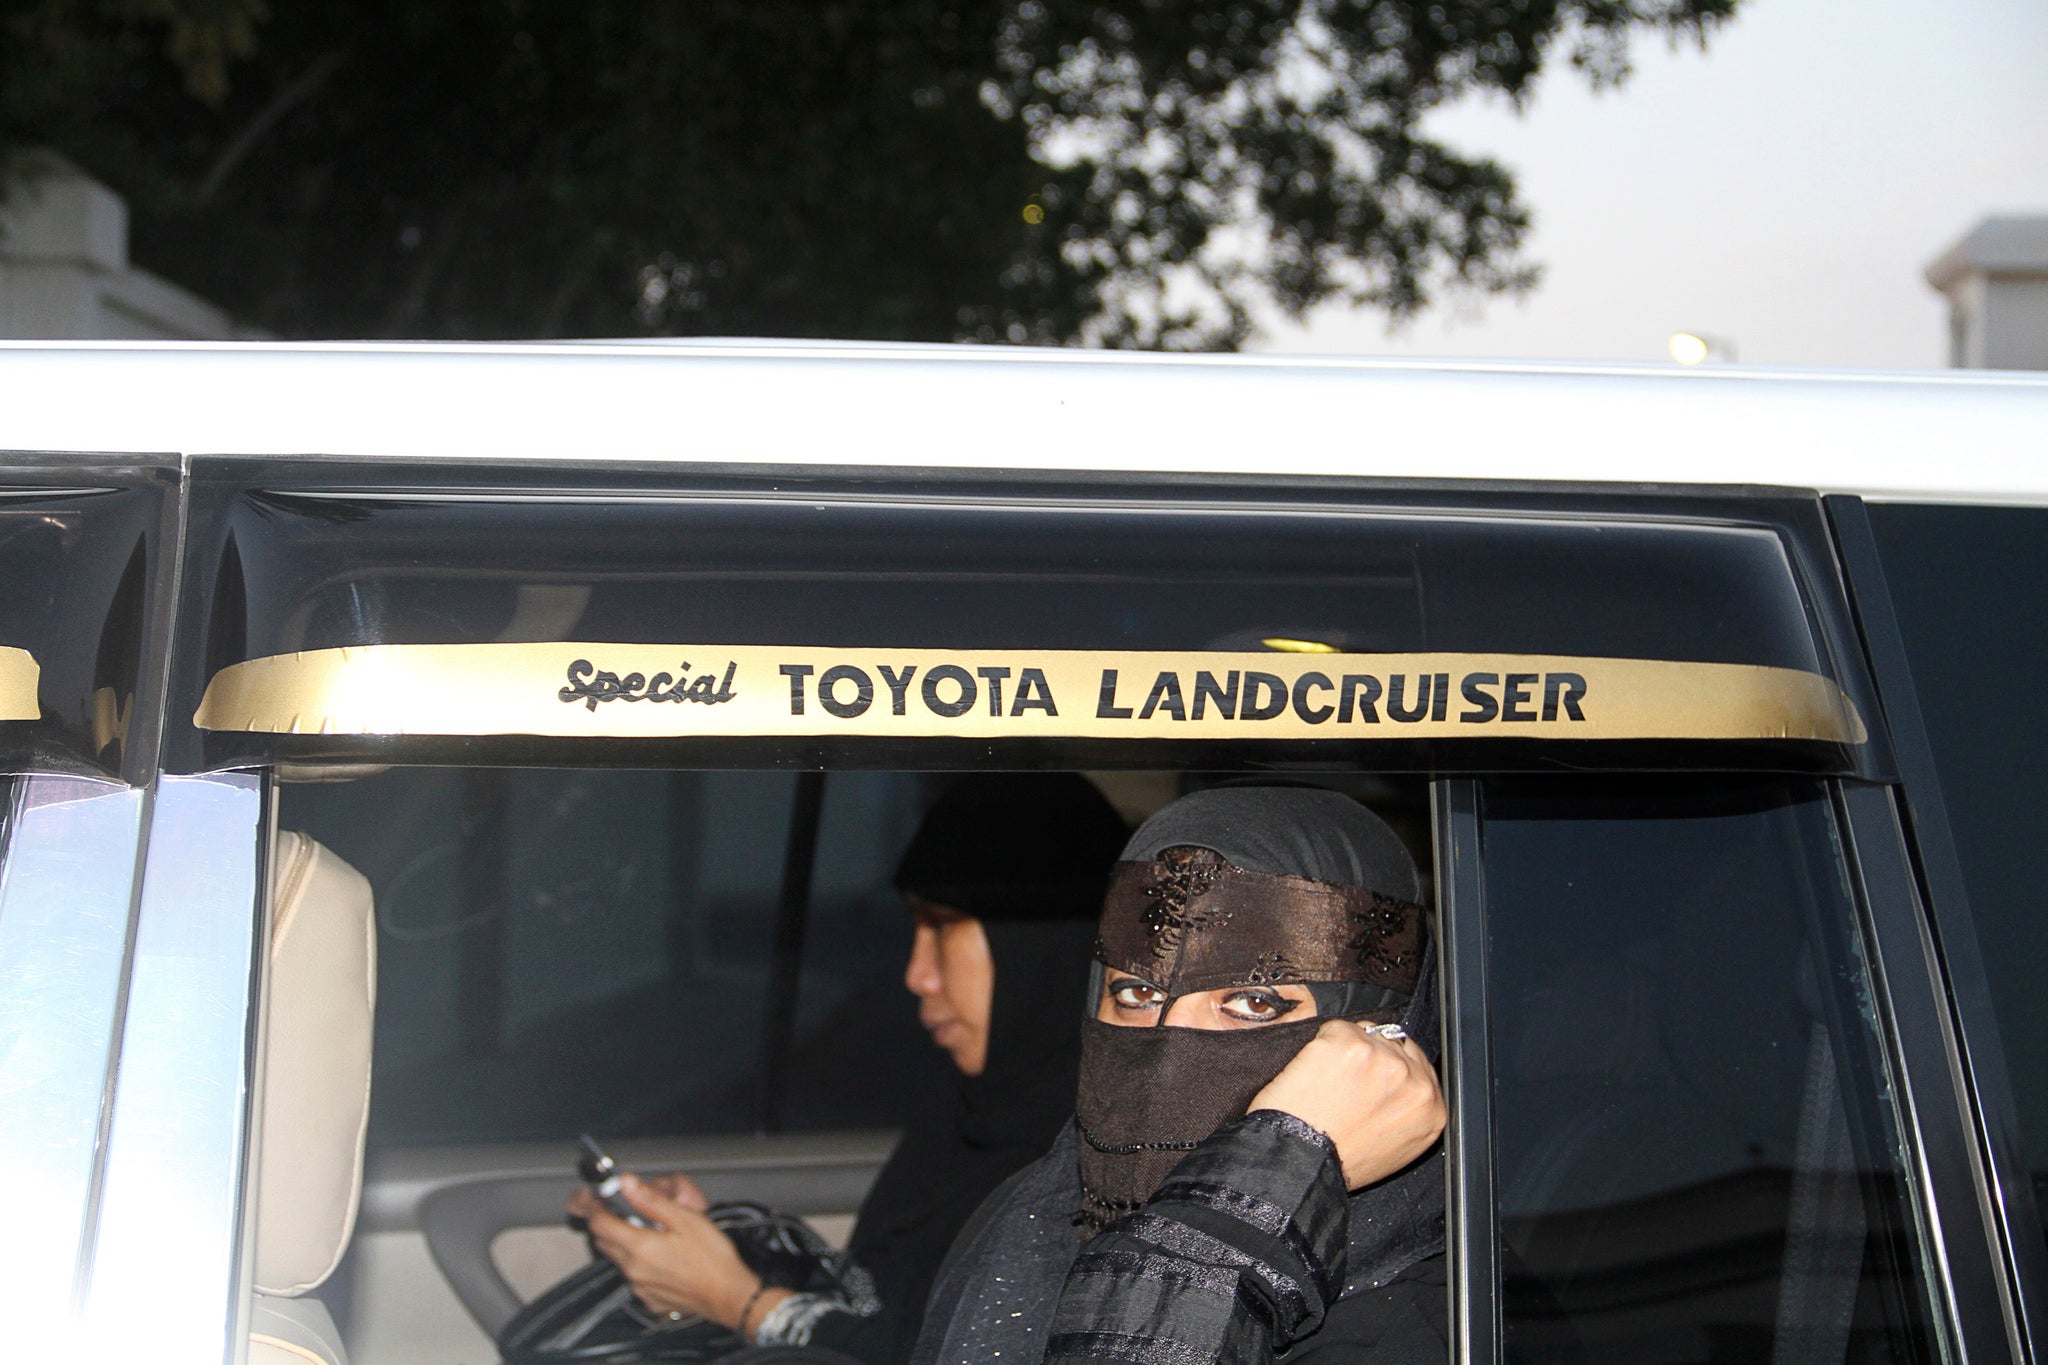 Women in Saudi Arabia must rely on male relatives to drive them places or pay drivers at a cost of about £200 a month